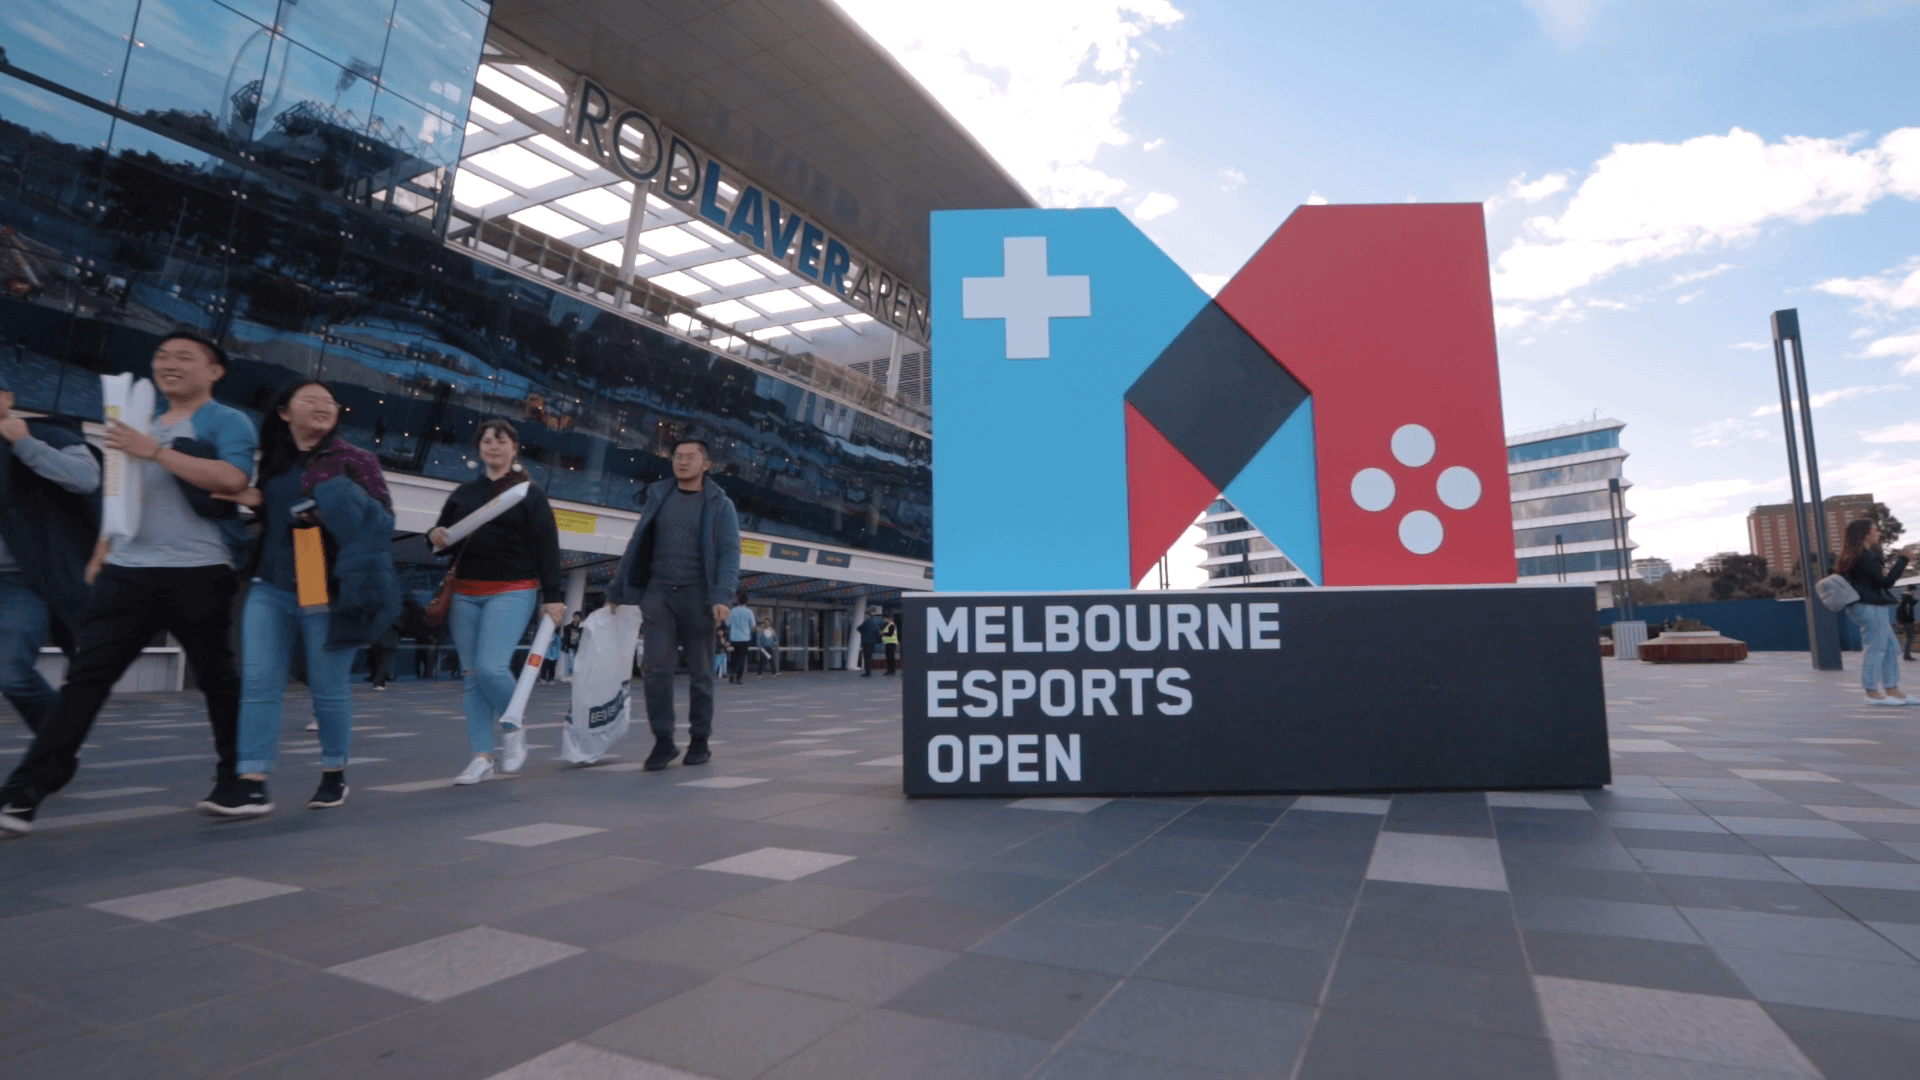 RMG | MELBOURNE ESPORTS OPEN – ALIENWARE BOOTH